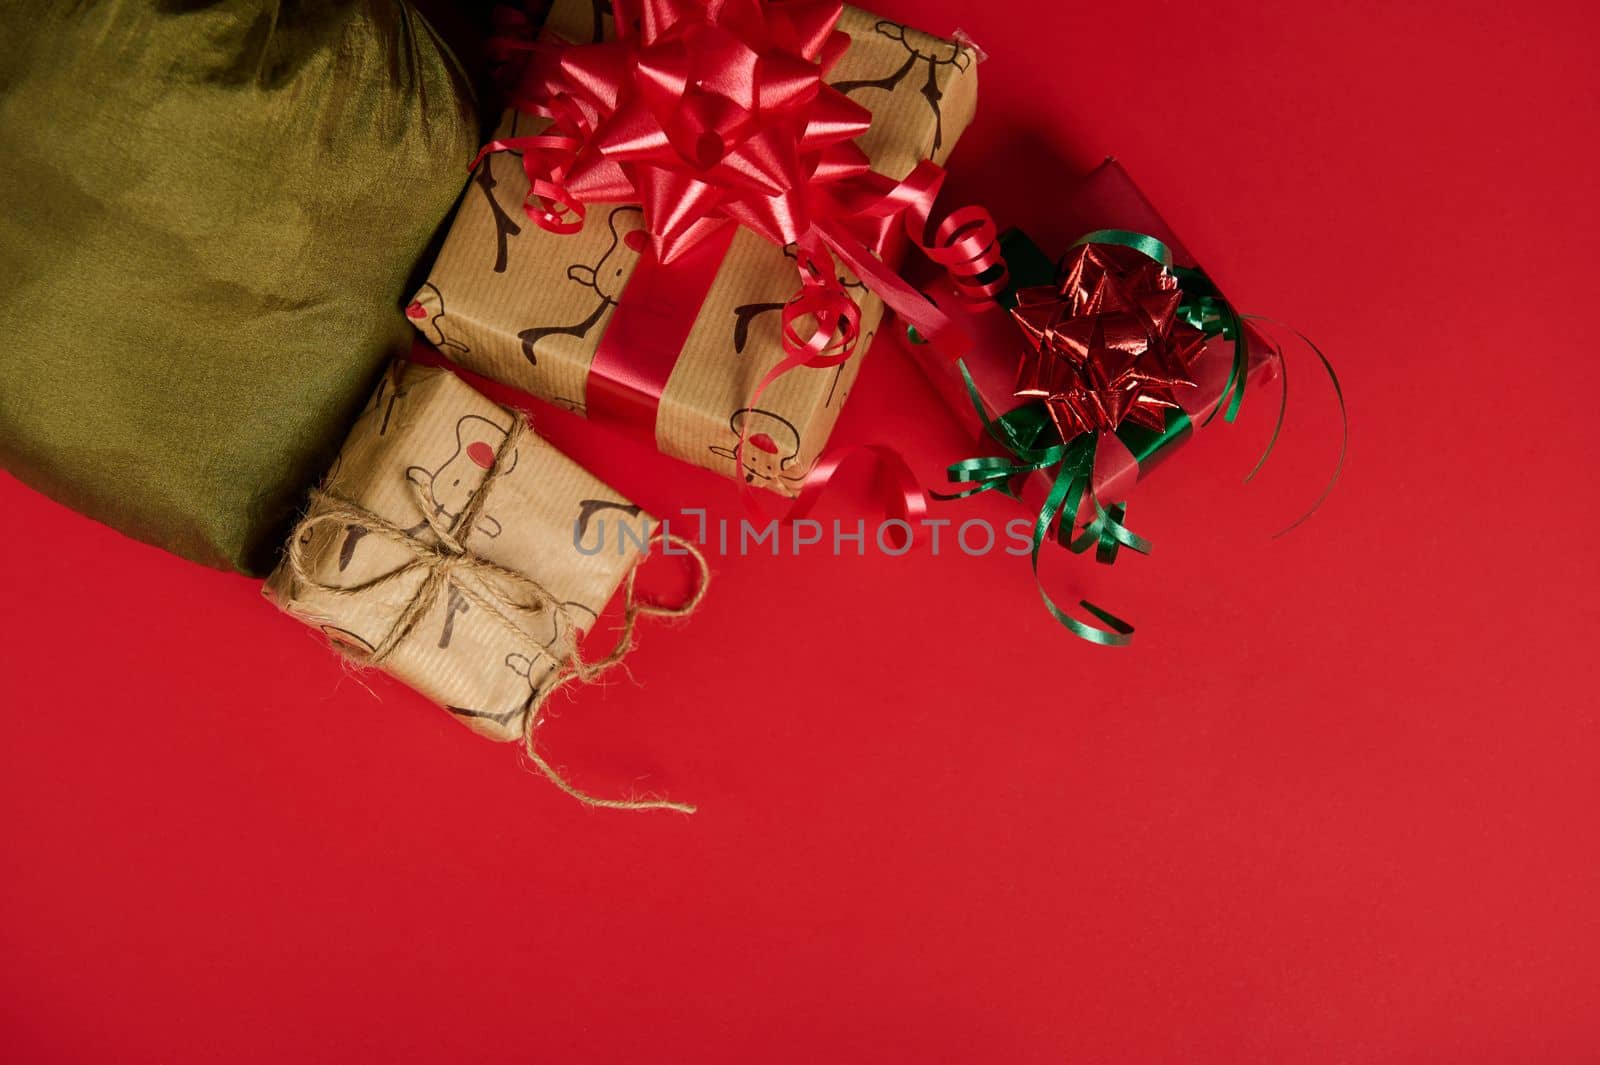 In the corner on a red background are boxes of Christmas gifts wrapped in stylish wrapping paper and tied with decorative bows and ribbons, and a green satin bag. New Year's event. Xmas. Boxing Day